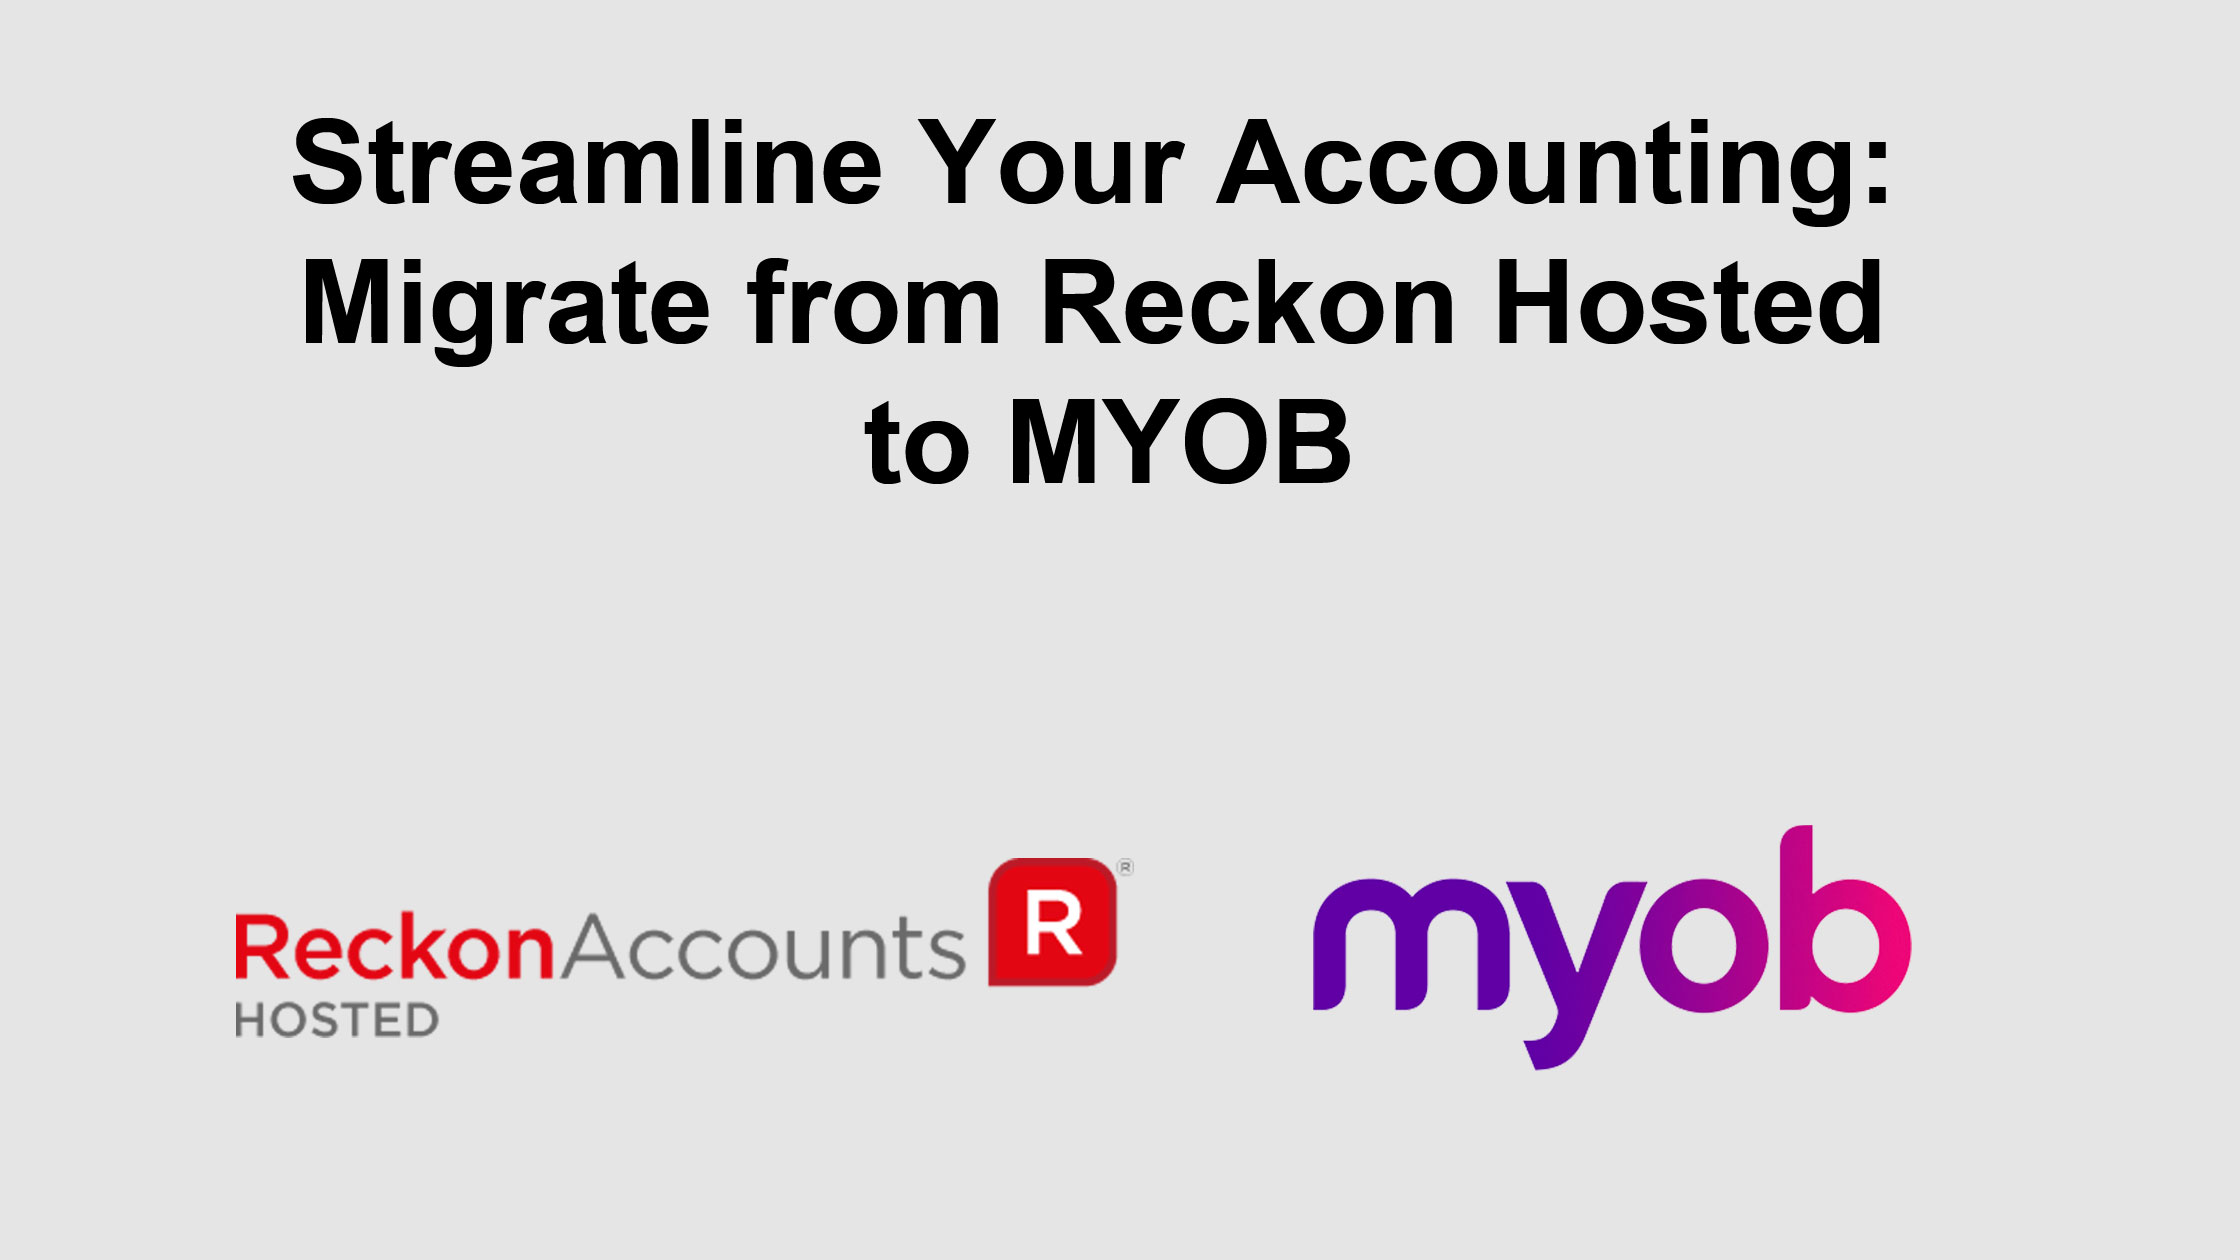 Streamline Your Accounting: Migrate from Reckon Hosted to MYOB